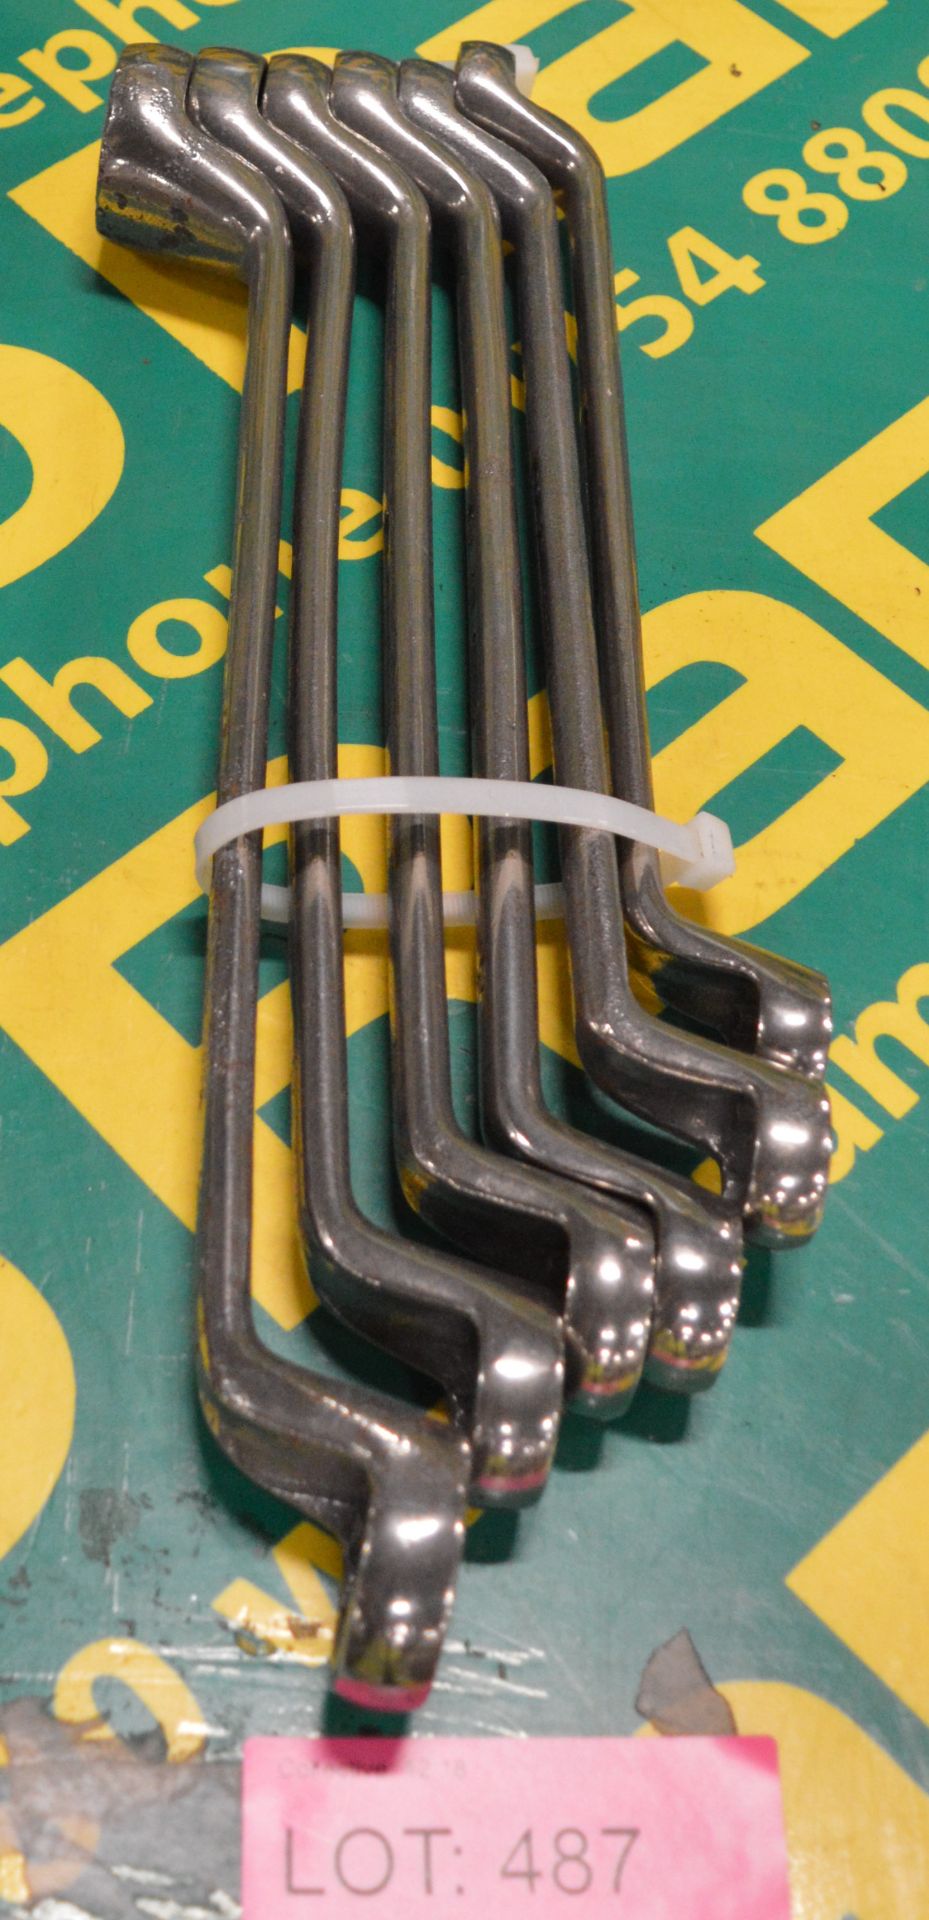 6x Ring Spanners 22 - 32mm.